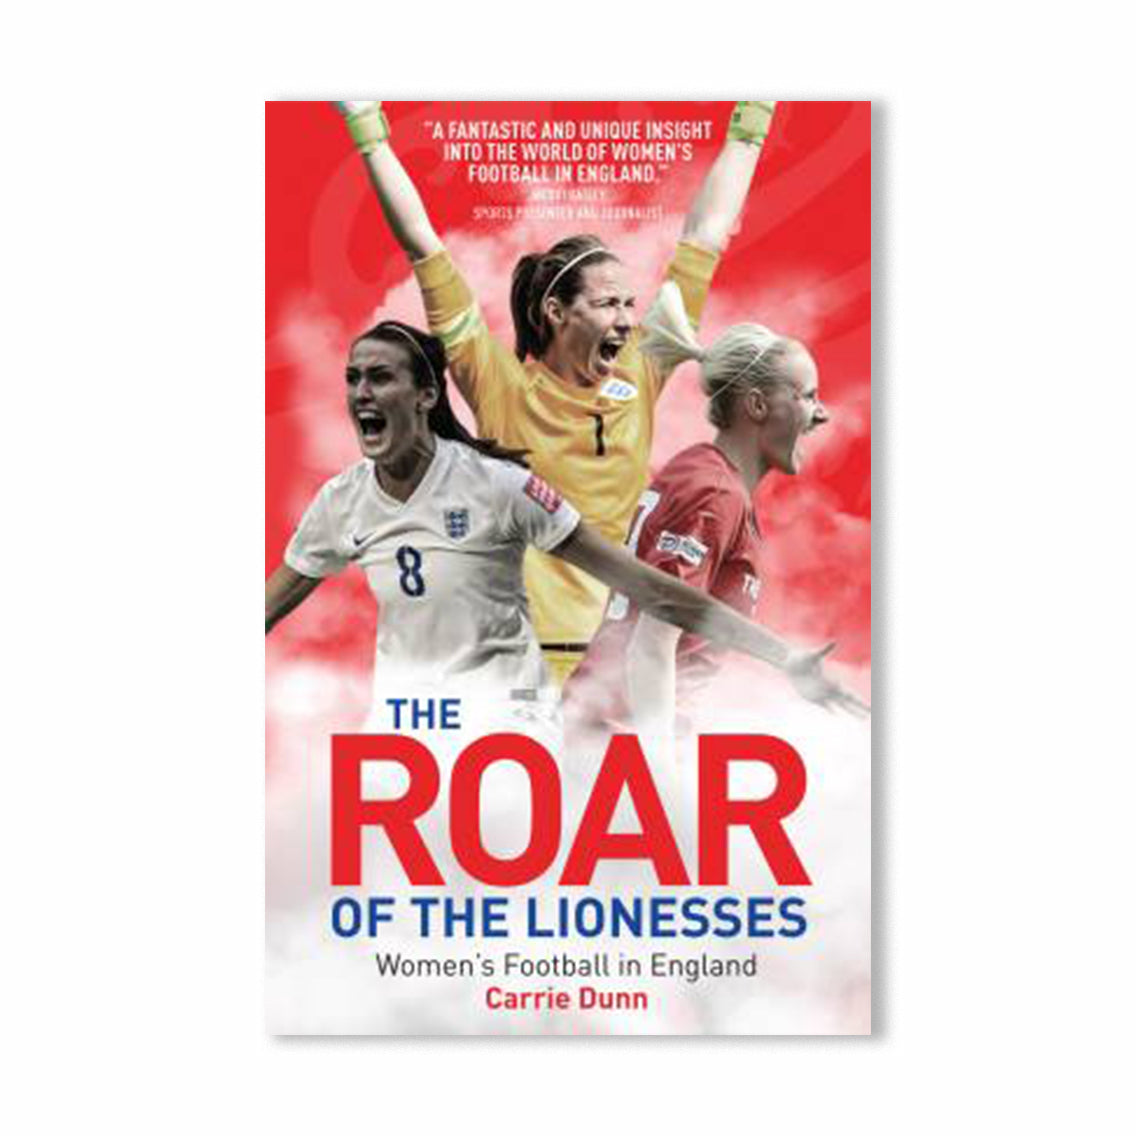 The Roar of the Lionesses: Women's Football in England